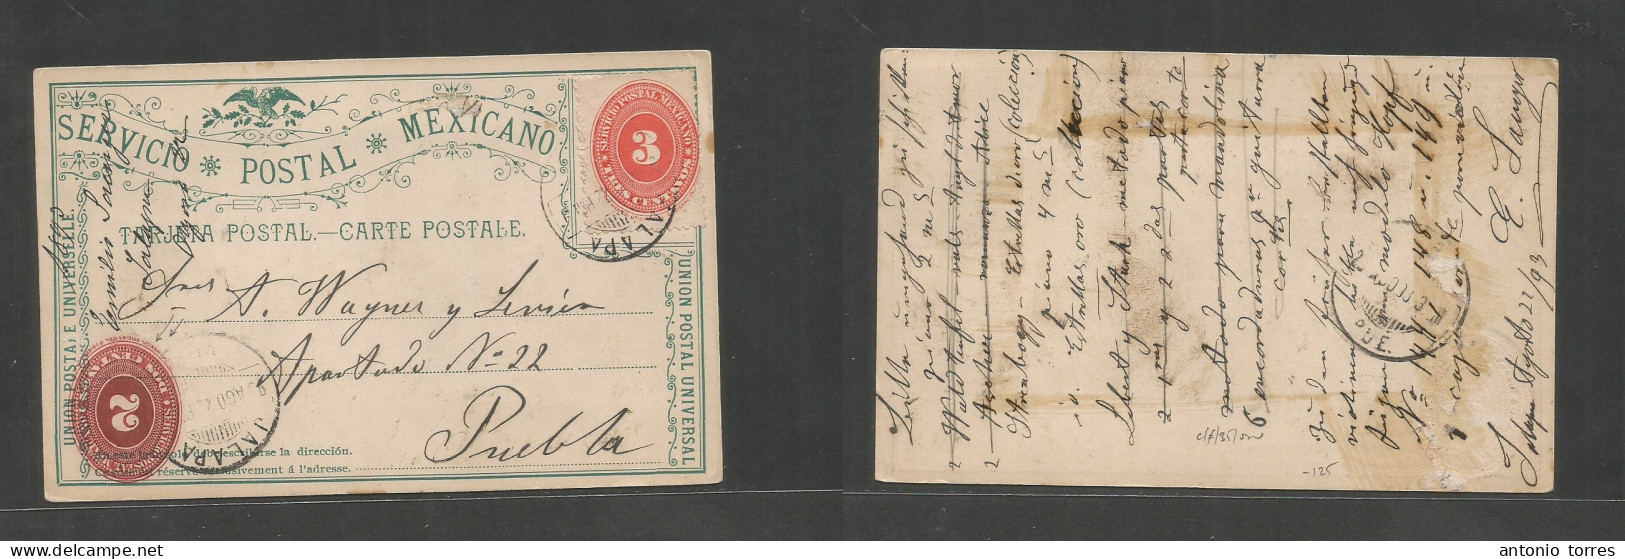 Mexico - Stationery. 1893 (22 Aug) Jalapa - Puebla. SPM 3c Vermelion Large Numeral Stat Card + 3c Red Adtl Inverted Prin - Mexiko